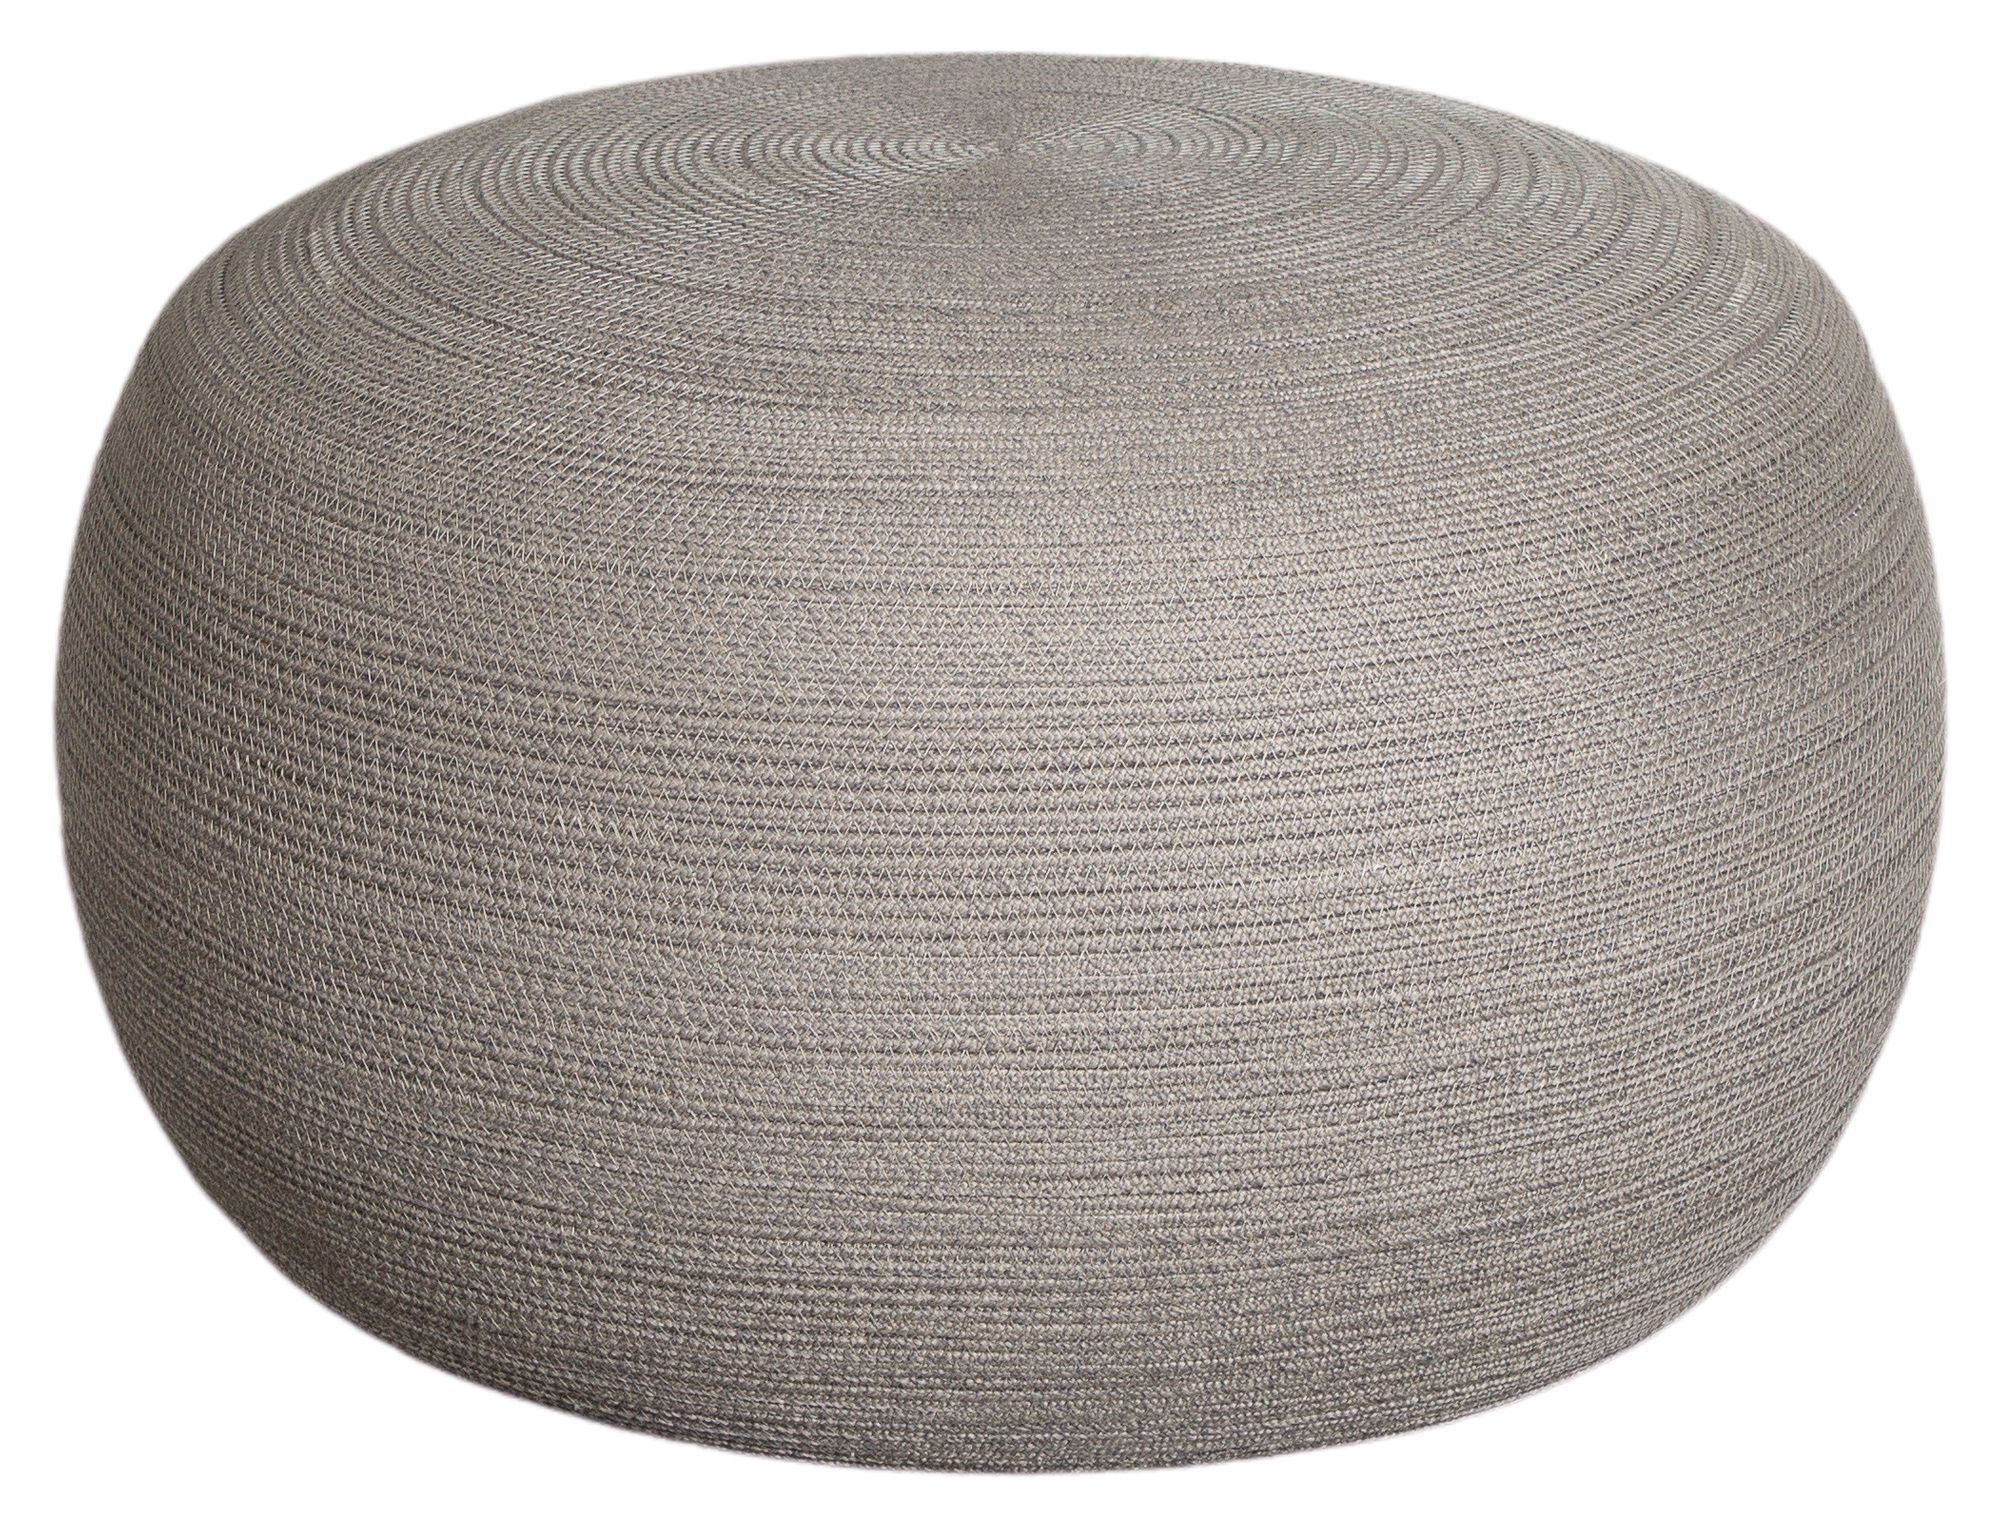 Cane-line Circle Puff, Taupe, Cane-line Soft Rope, Ø75   Unoliving